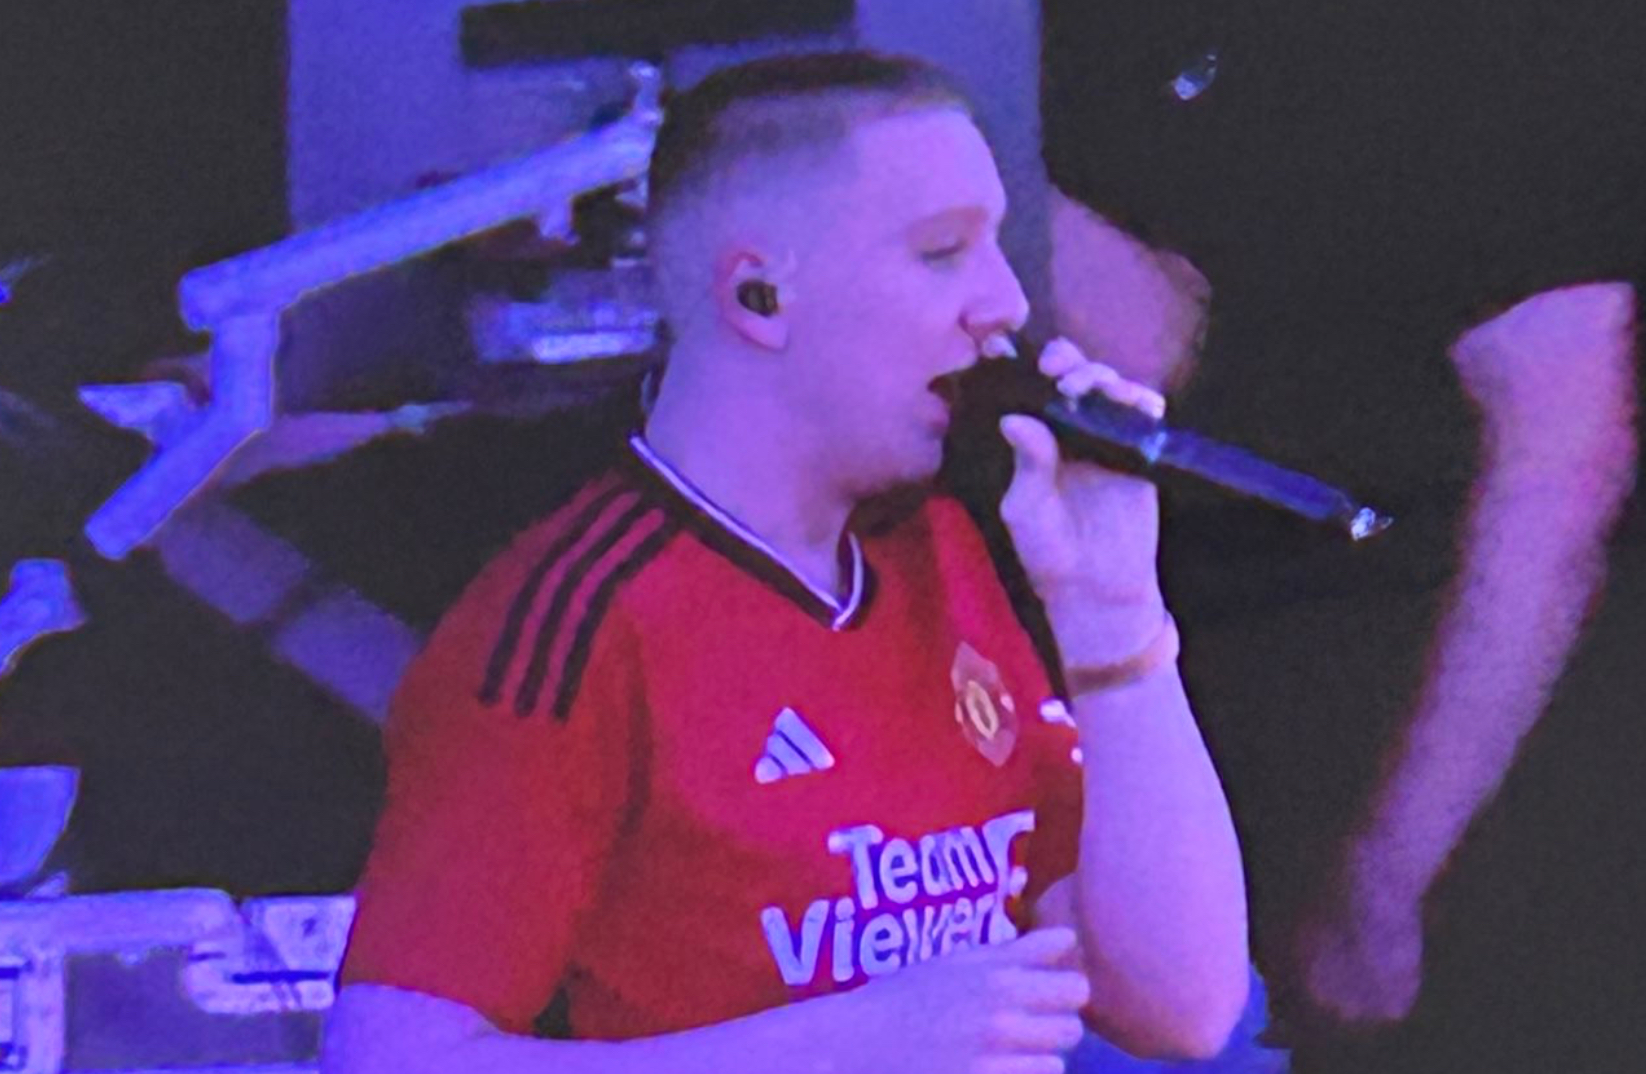 Photo: Rapper Aitch spotted on stage at Glastonbury wearing new Man United shirt CaughtOffside